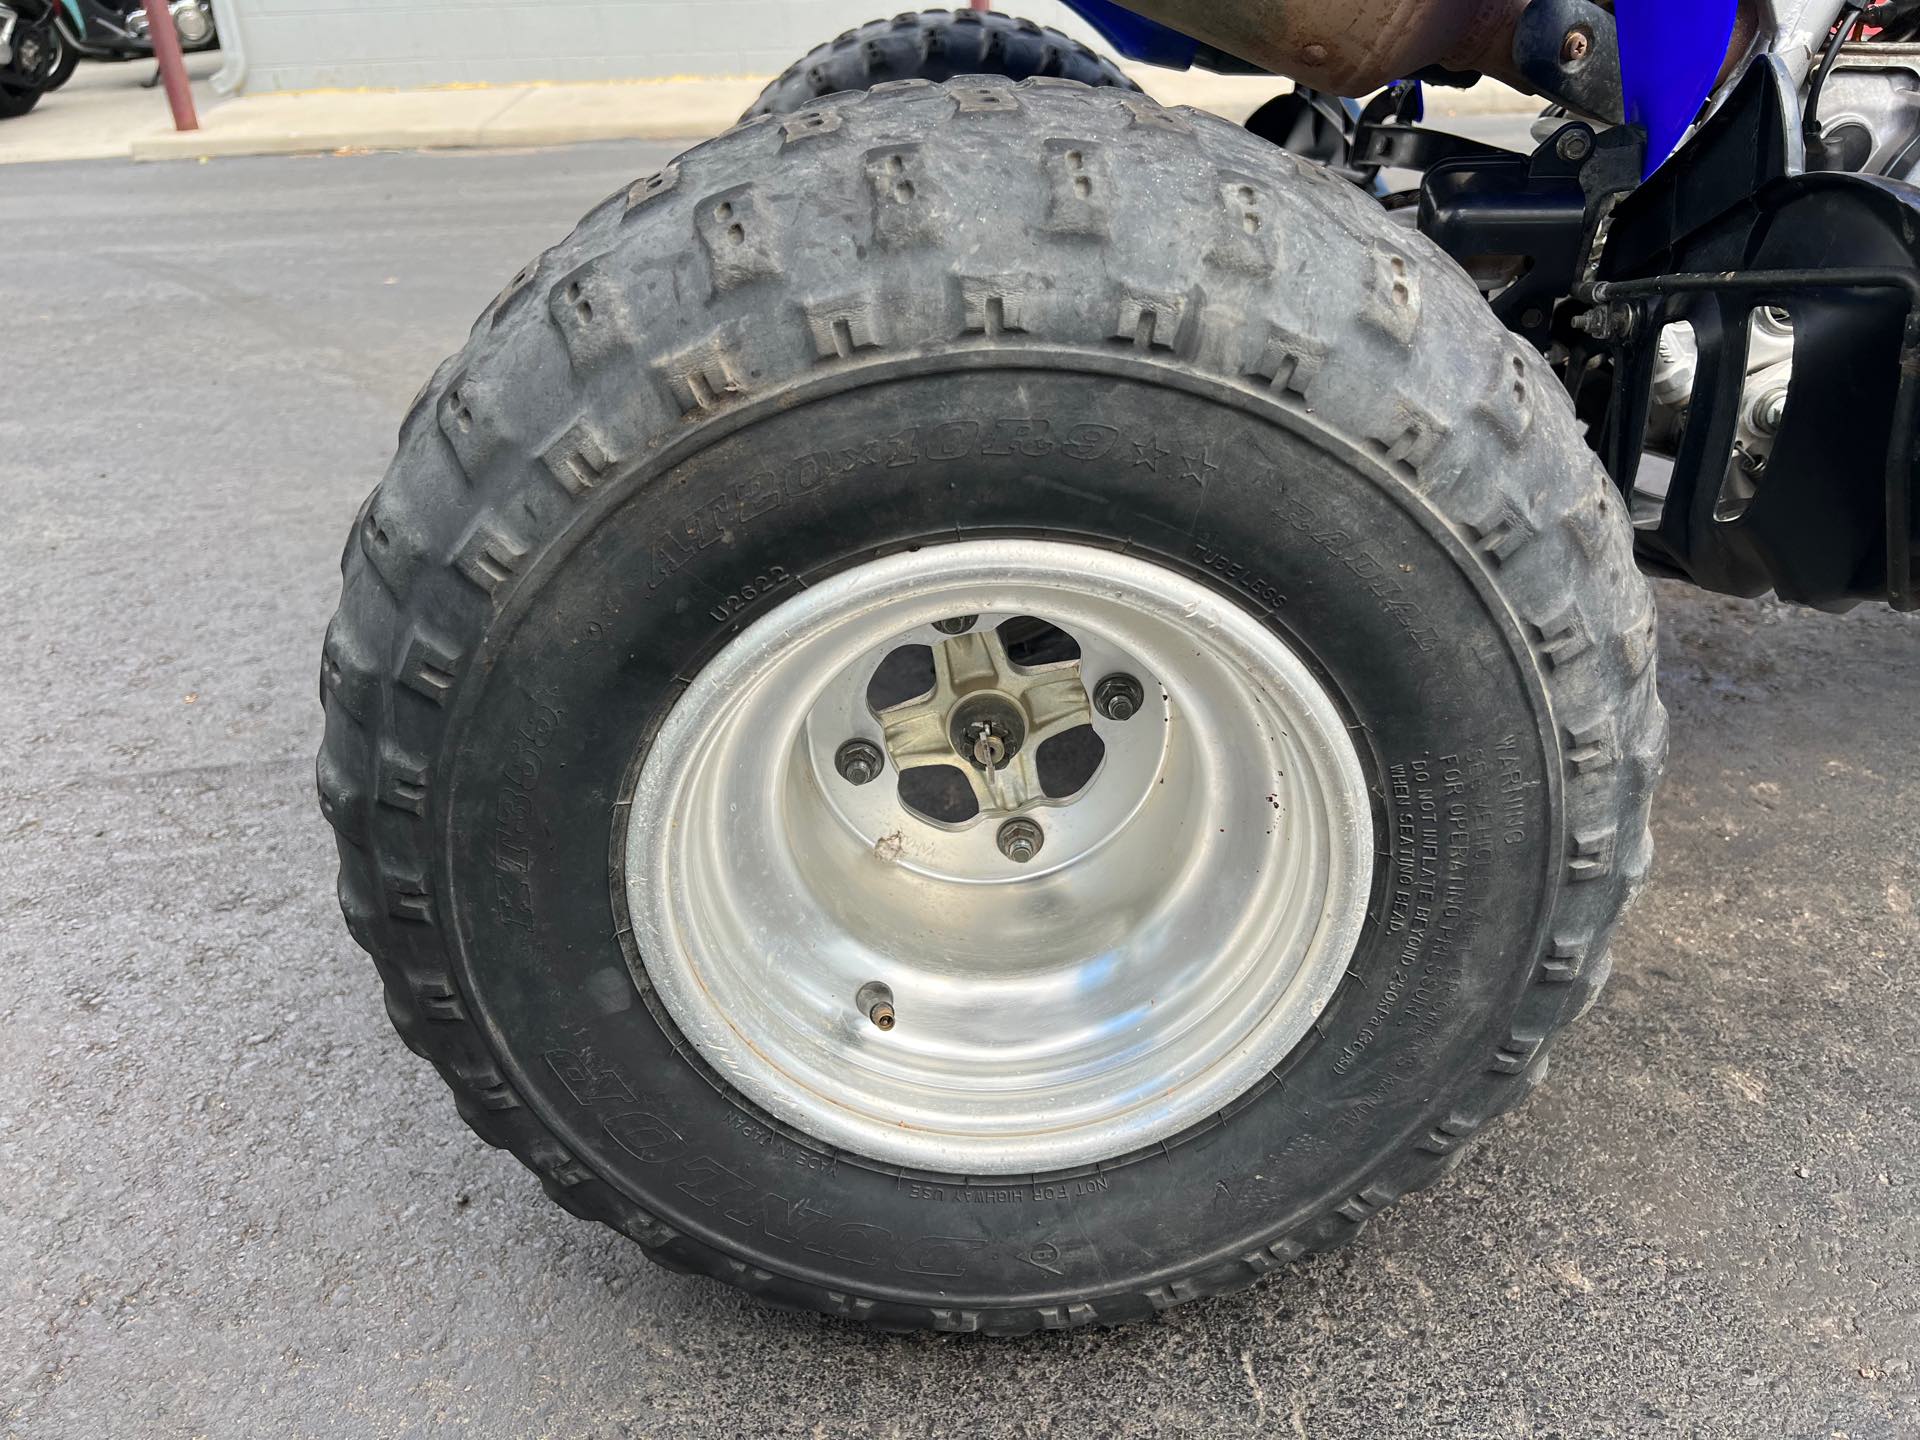 2005 Yamaha YFZ450 Base at Aces Motorcycles - Fort Collins